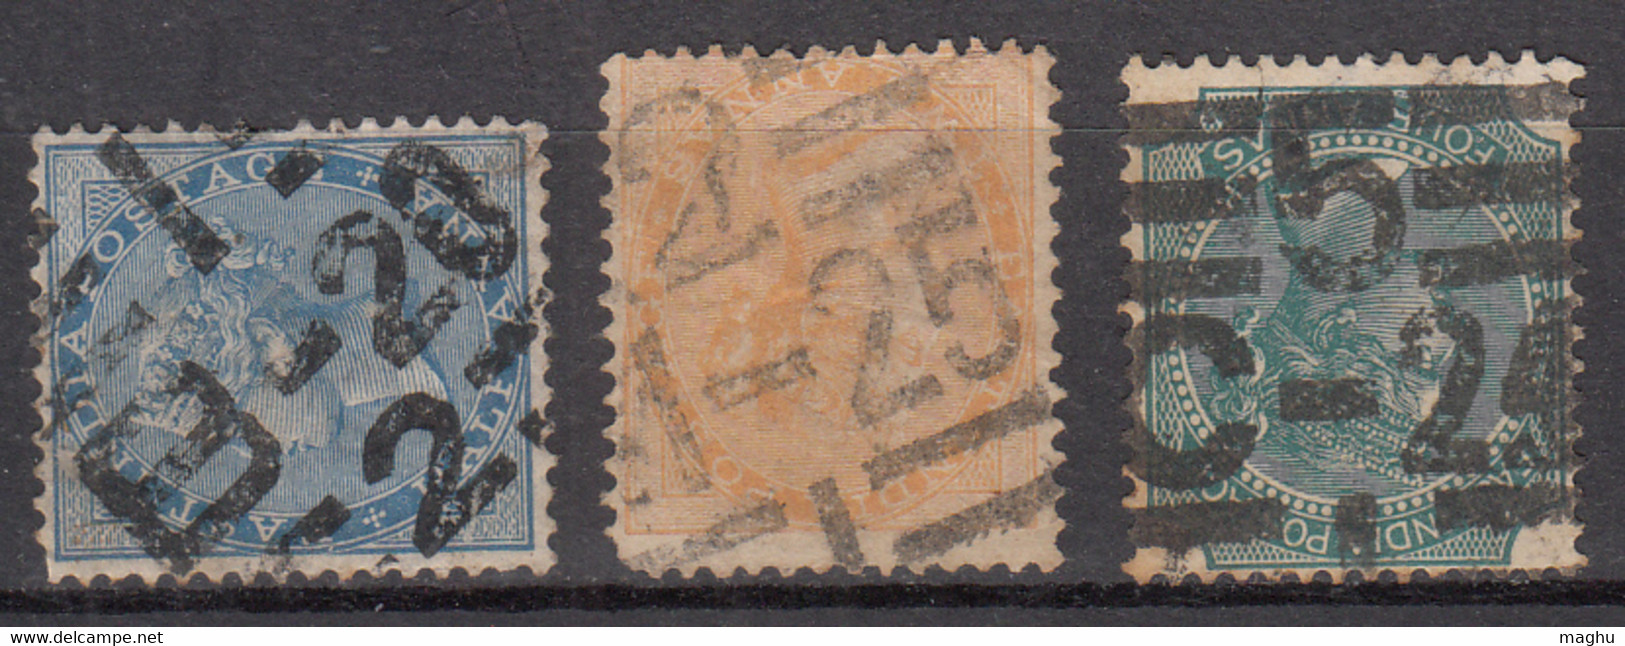 3 Diff., Cancellation Of  JC Type 32a / Martin 17b, QV British East India India Used, Early Indian Cancellation - 1854 Compagnia Inglese Delle Indie